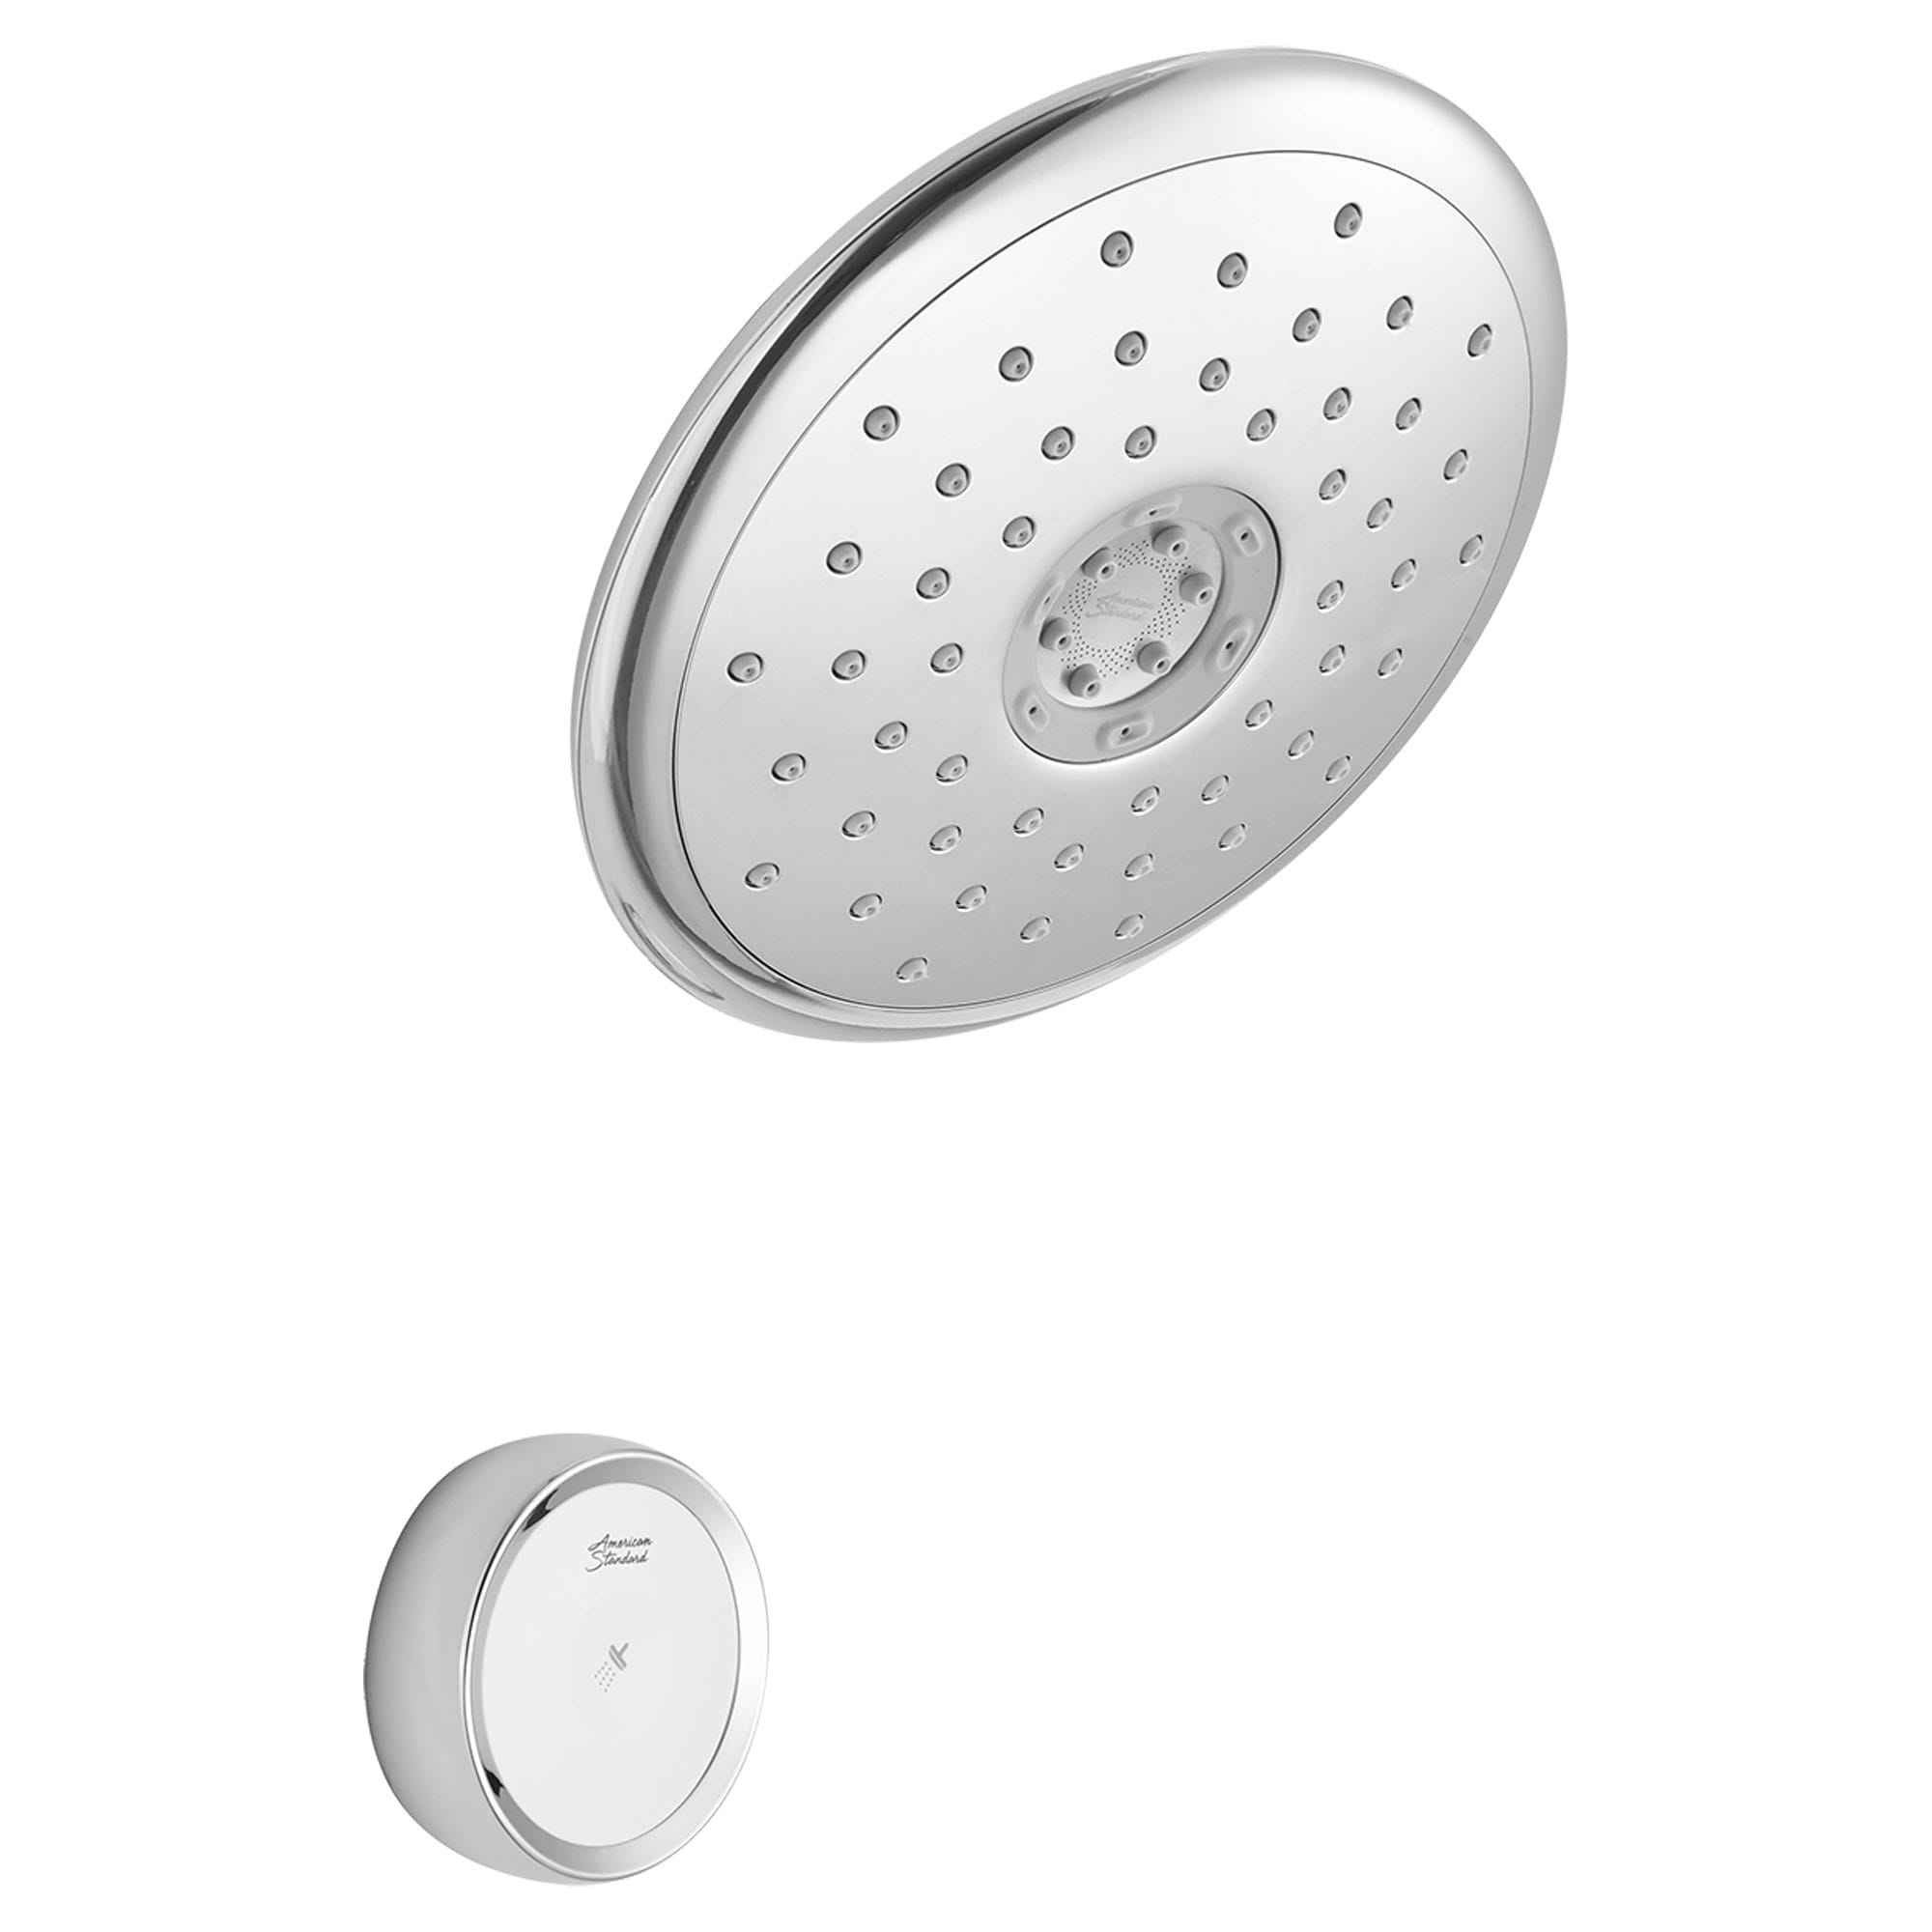 Spectra® eTouch 7-Inch 1.8 gpm/6.8 L/min Water-Saving Fixed Showerhead